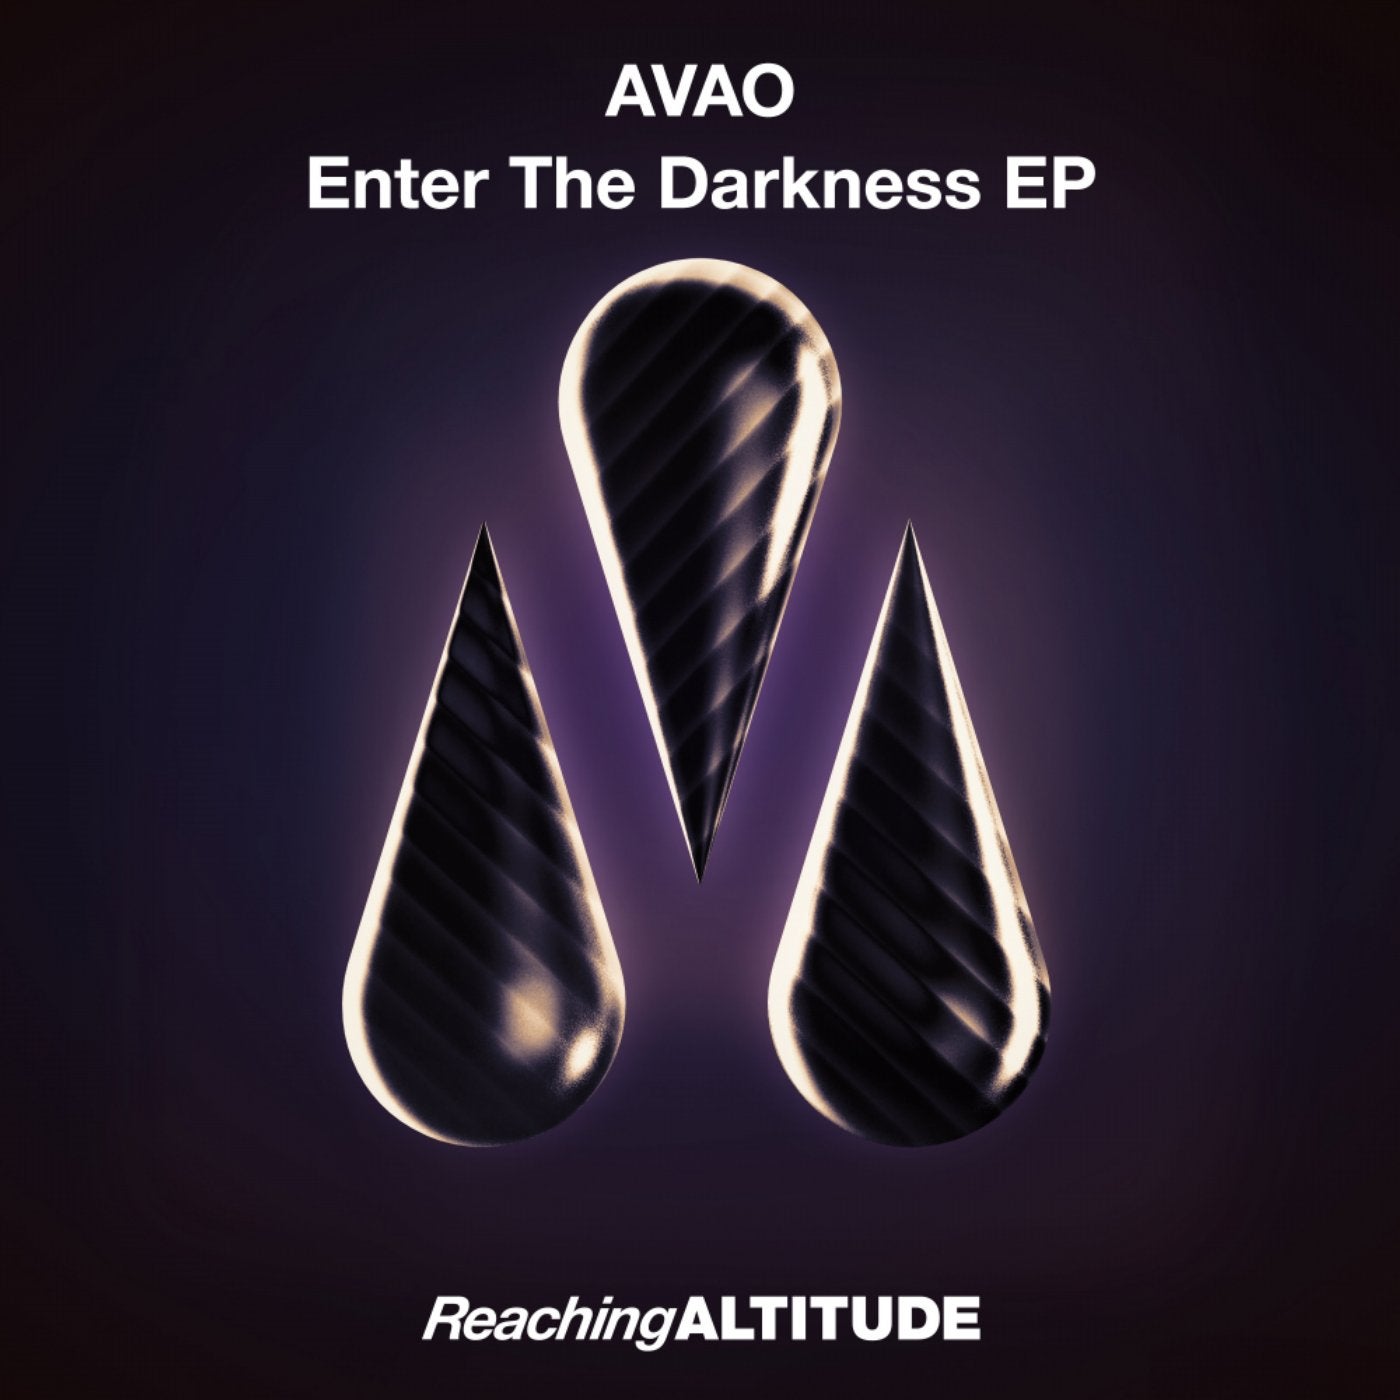 Enter The Darkness EP